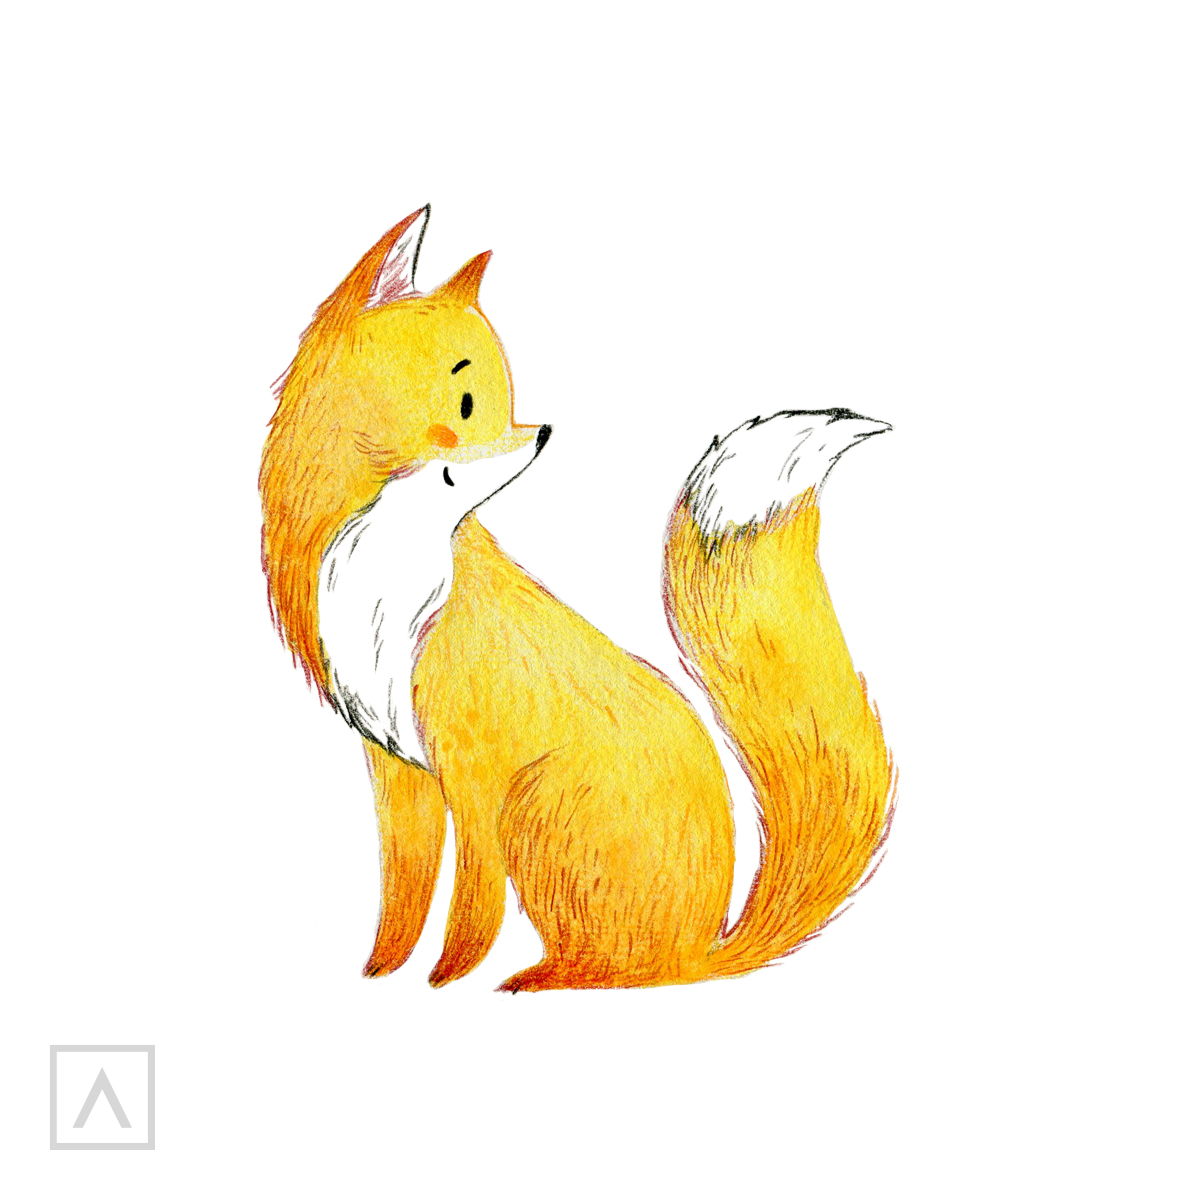 How to draw a fox - Step 7